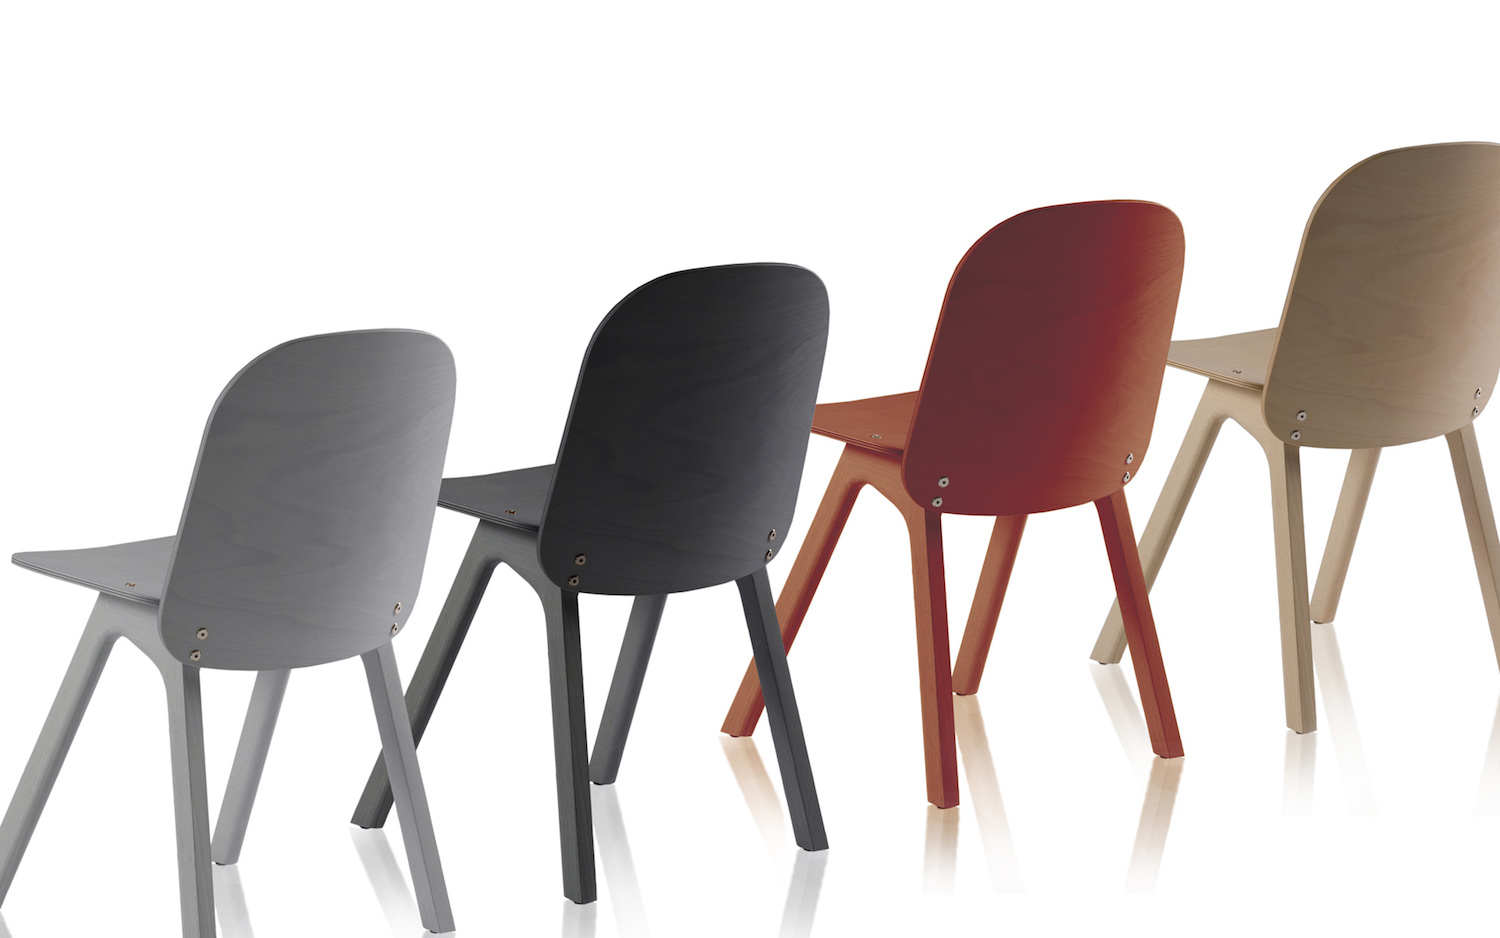 Wedge Chairs by Marcel Sigel for Capdell